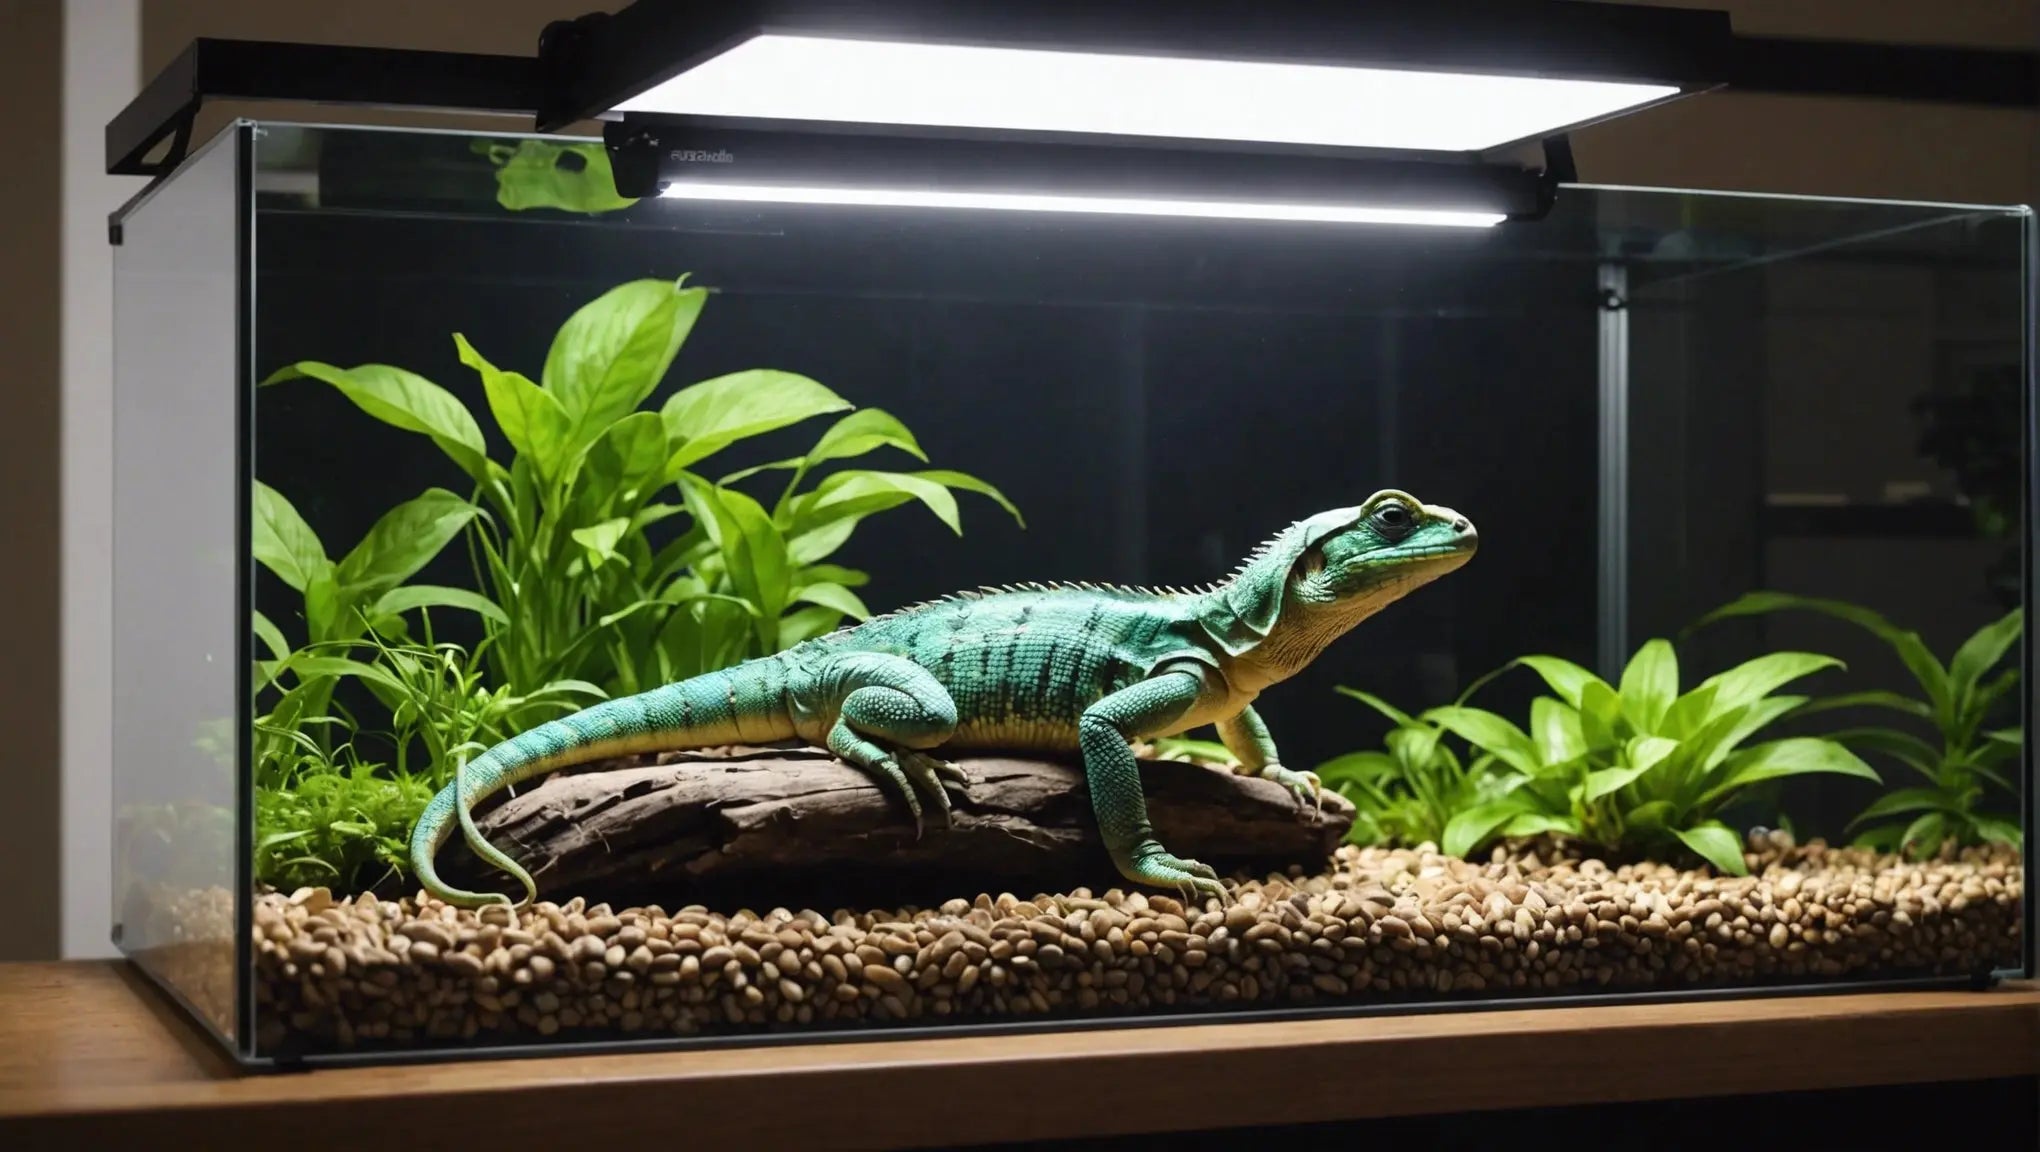 Why Arcadia T5 UVB Lighting is Essential for Reptiles